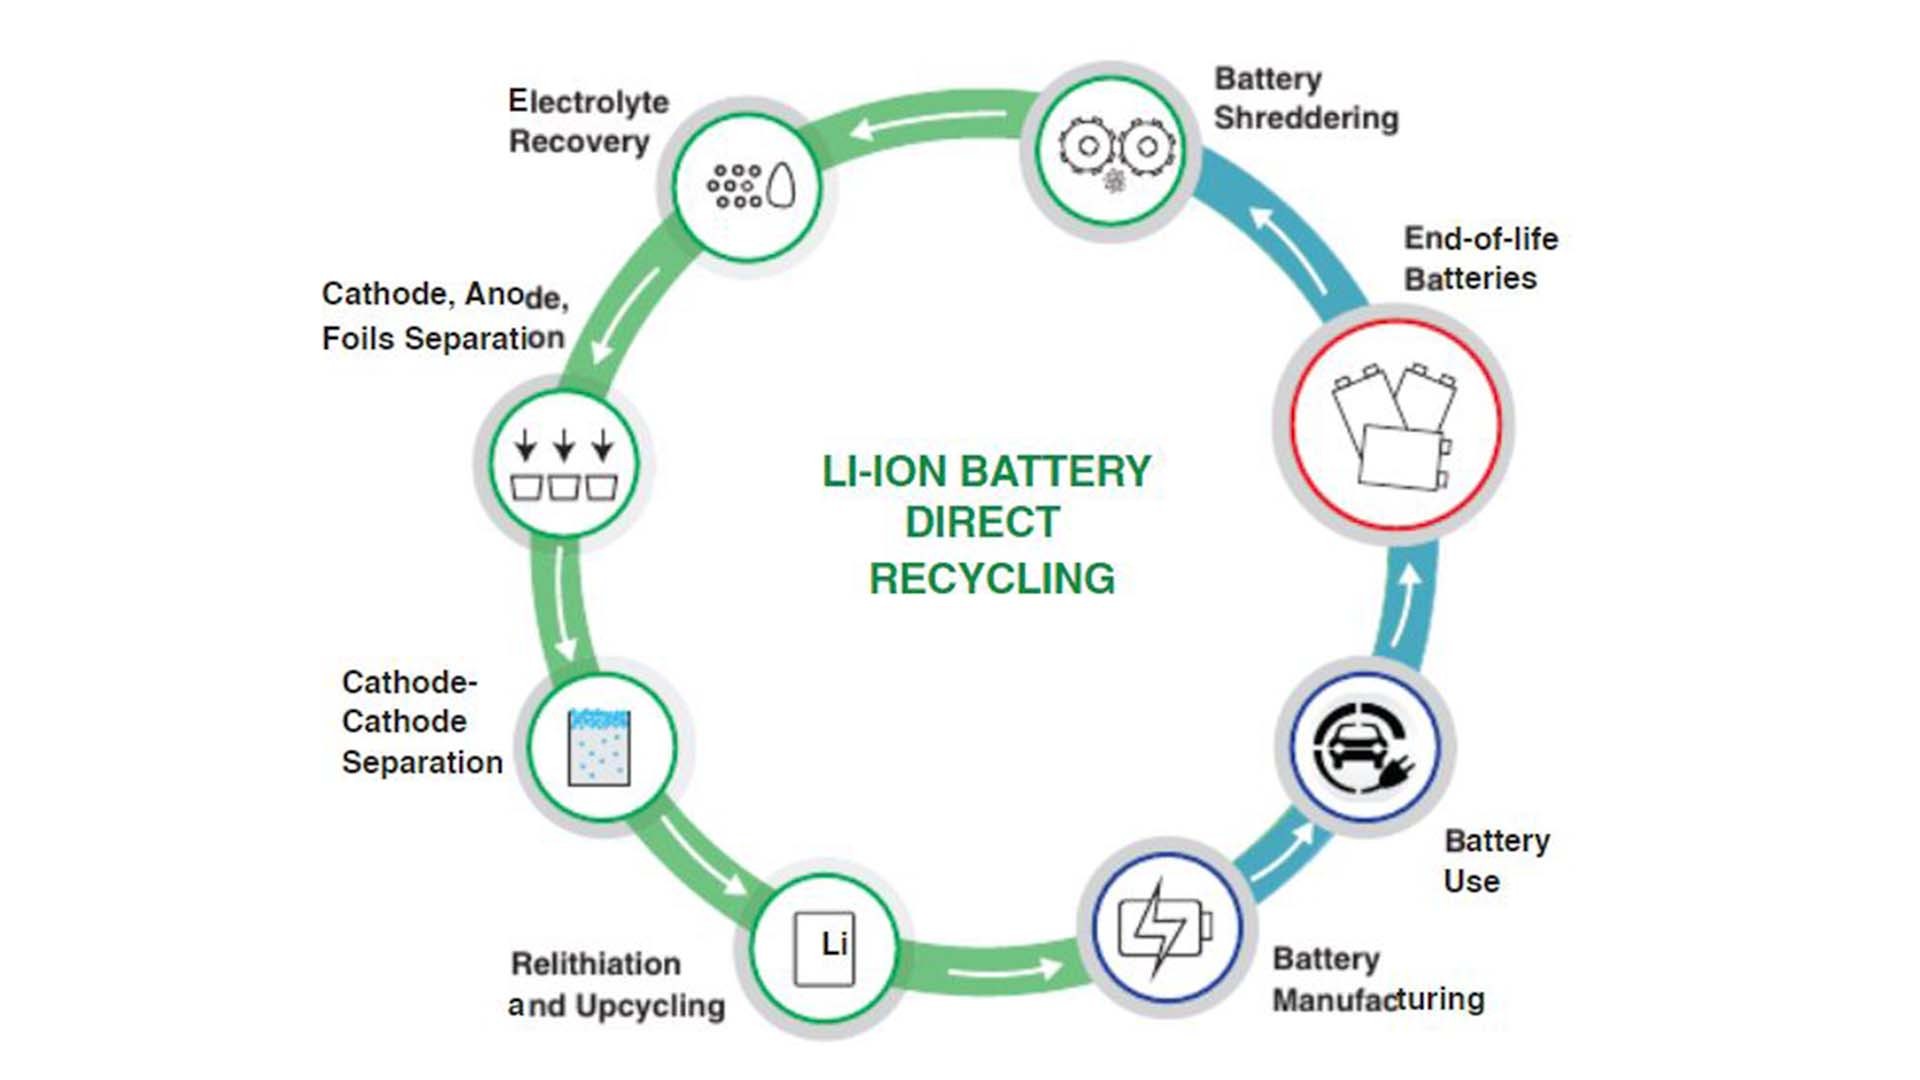 lithium-battery-direct-recycling-4507.jpg